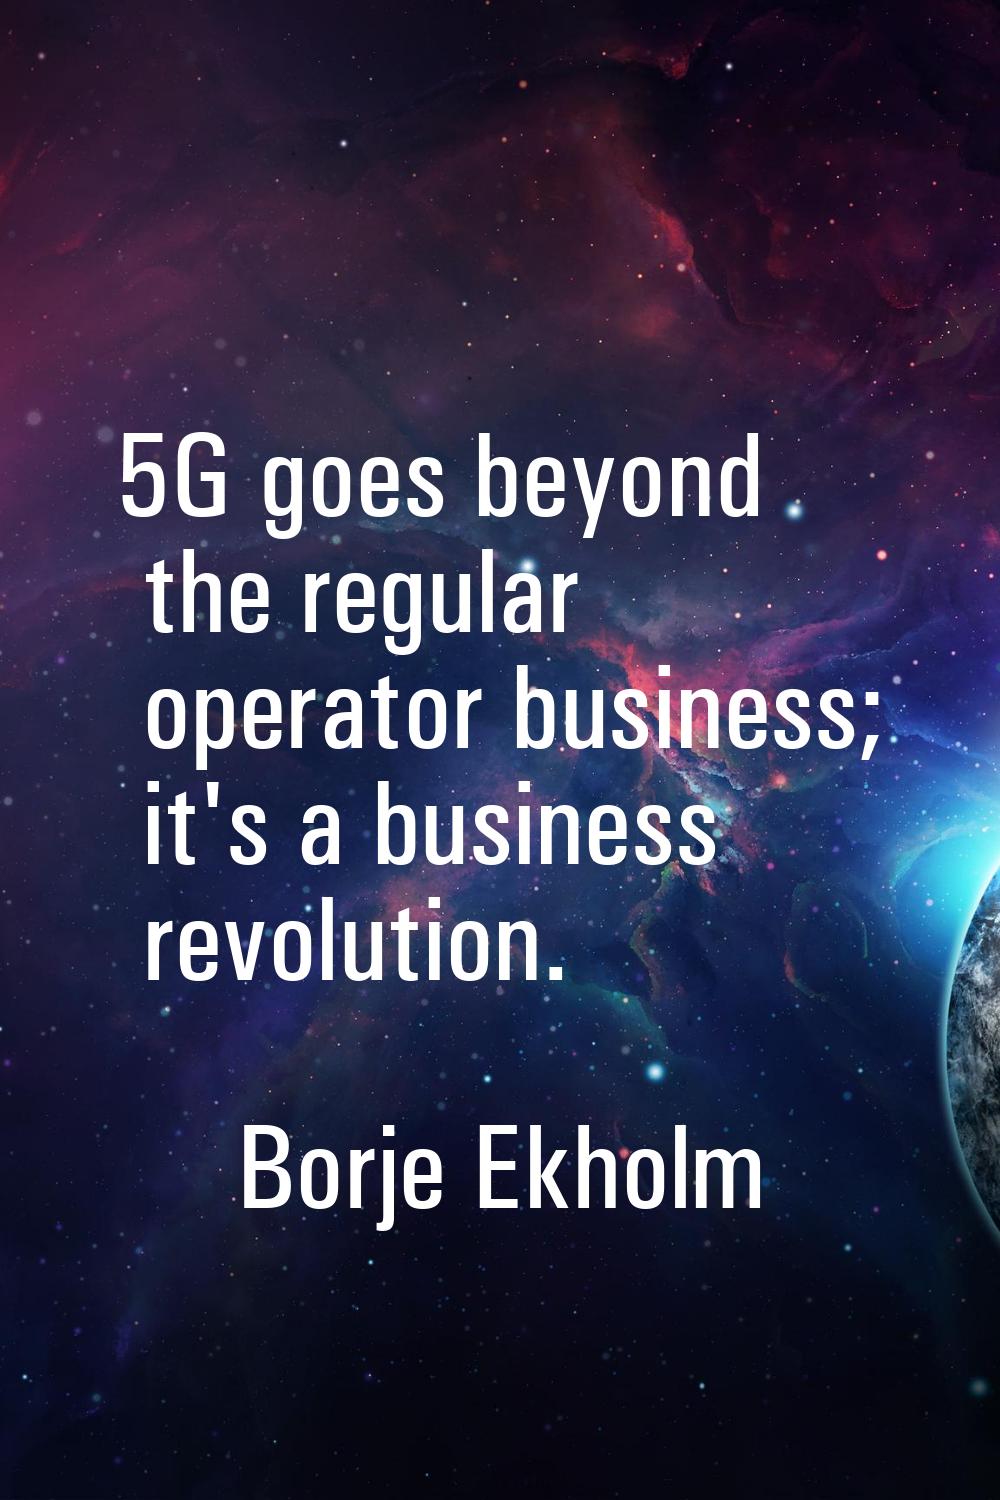 5G goes beyond the regular operator business; it's a business revolution.